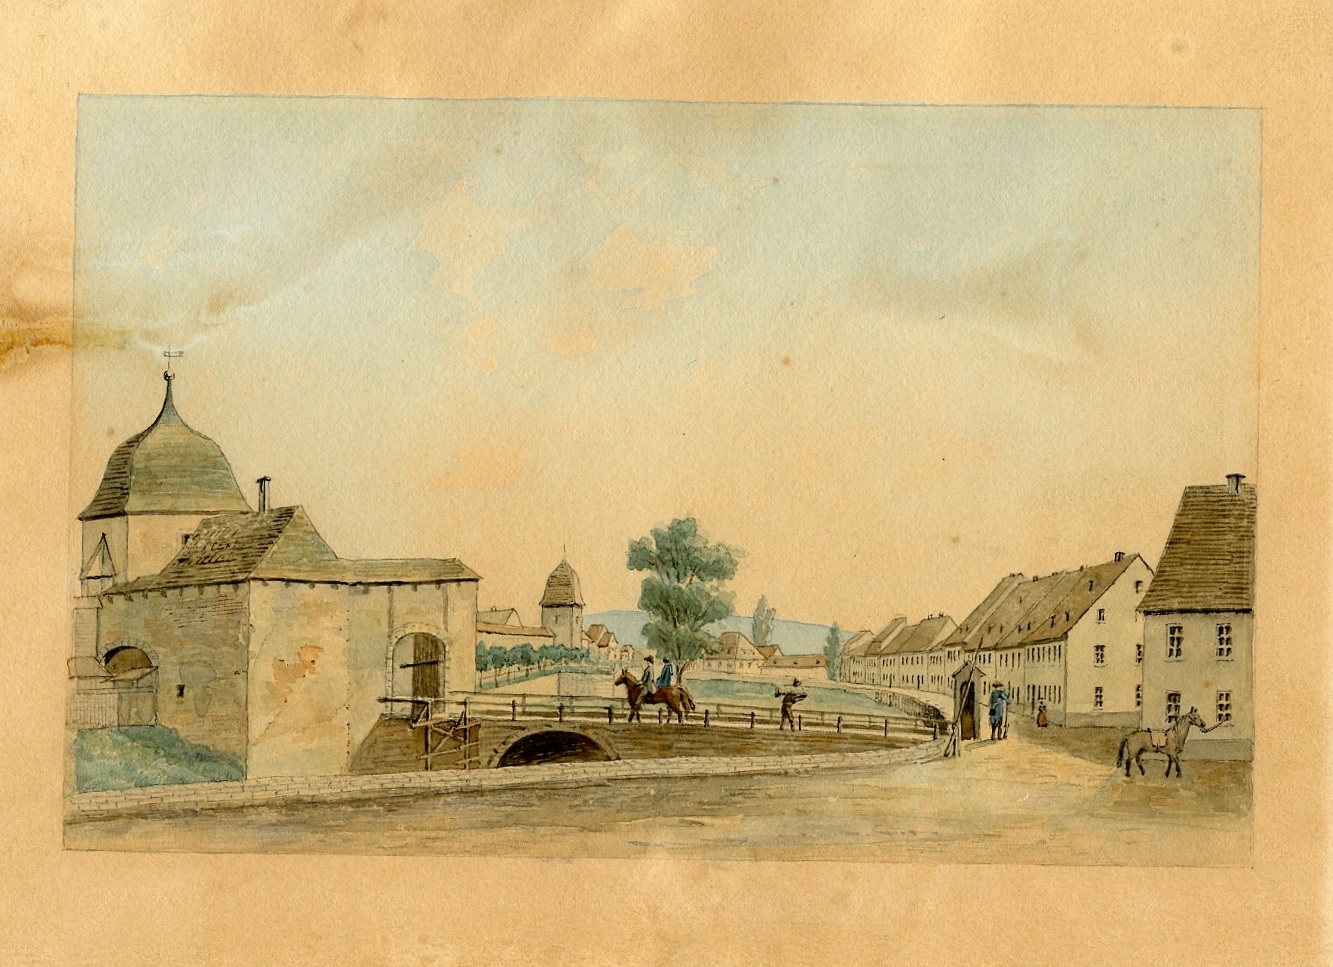 What is known as Schloßbergmuseum and Schloßkirche today used to be a Benedictine monastery. The road that led there from the town went through the Klostertor gate and the monastery district. This watercolour by A. Gottschaldt shows the Klostertor gate around 1820, and is taken from a lithograph by W. Flemming from around 1900.